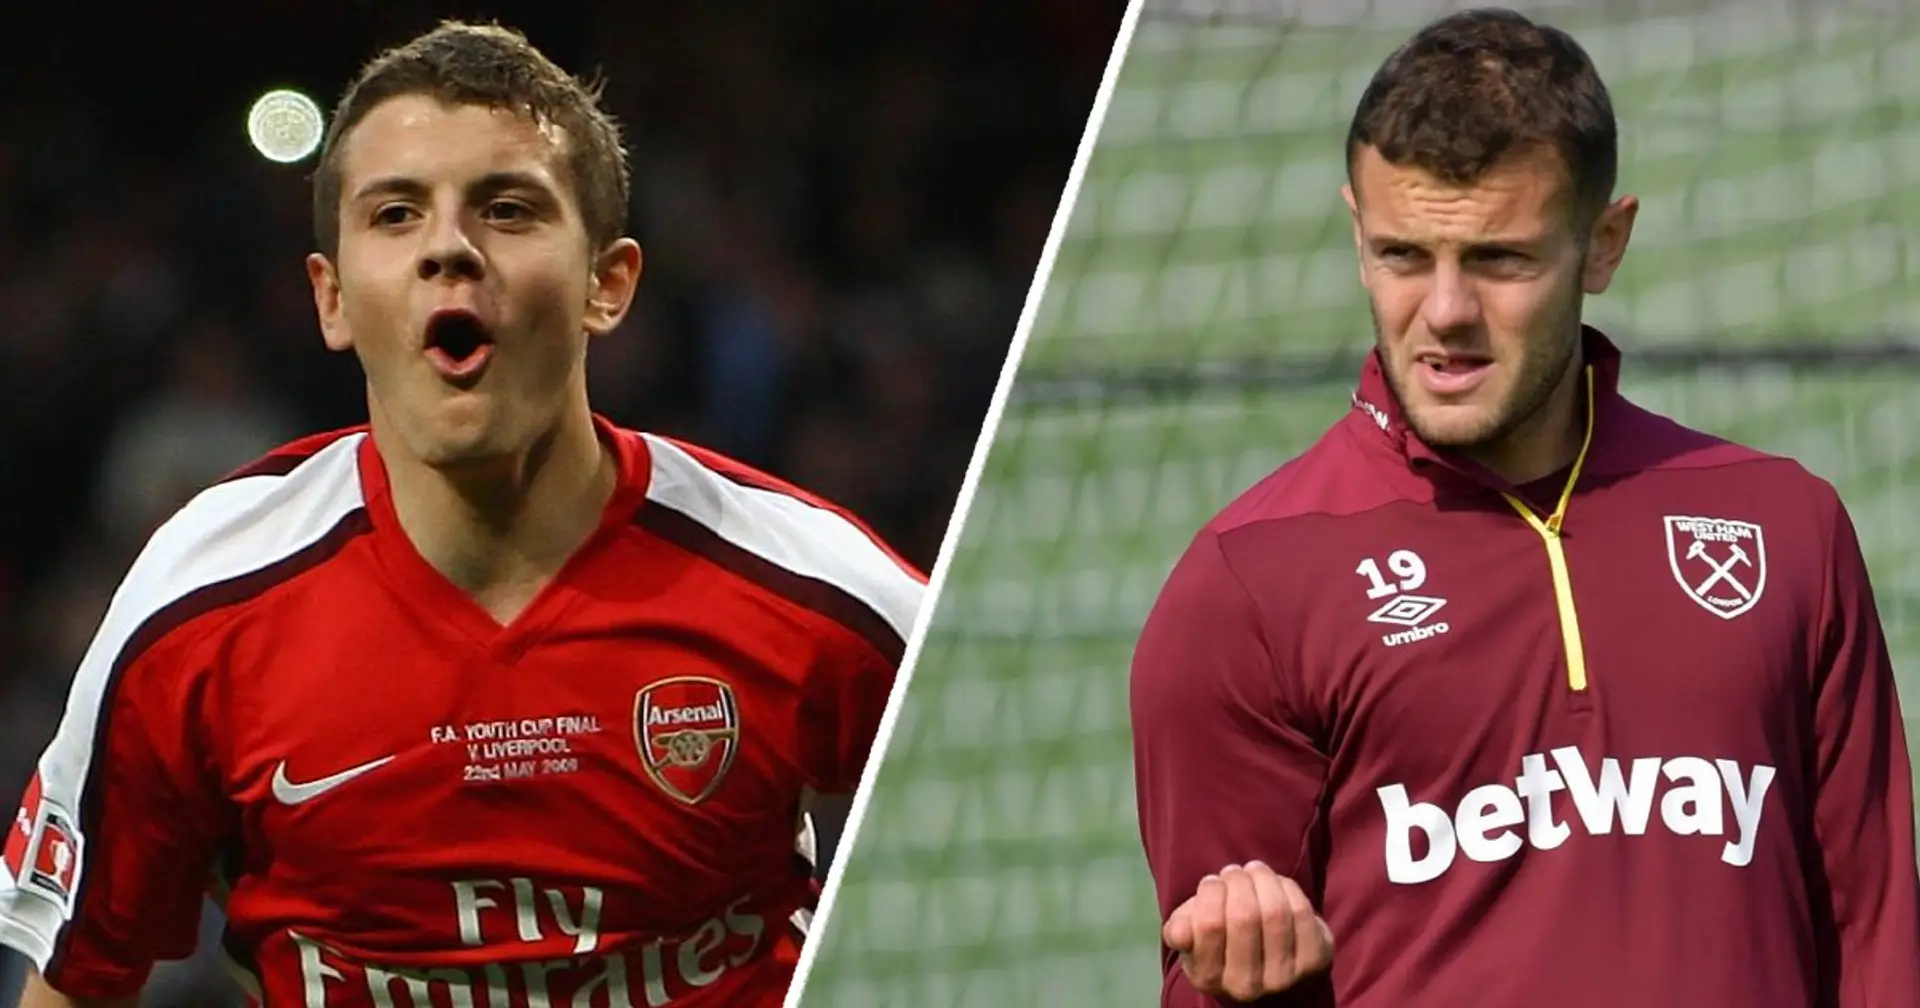 Wilshere recalls first years at Arsenal: 'I didn't really feel like I deserved to be there'